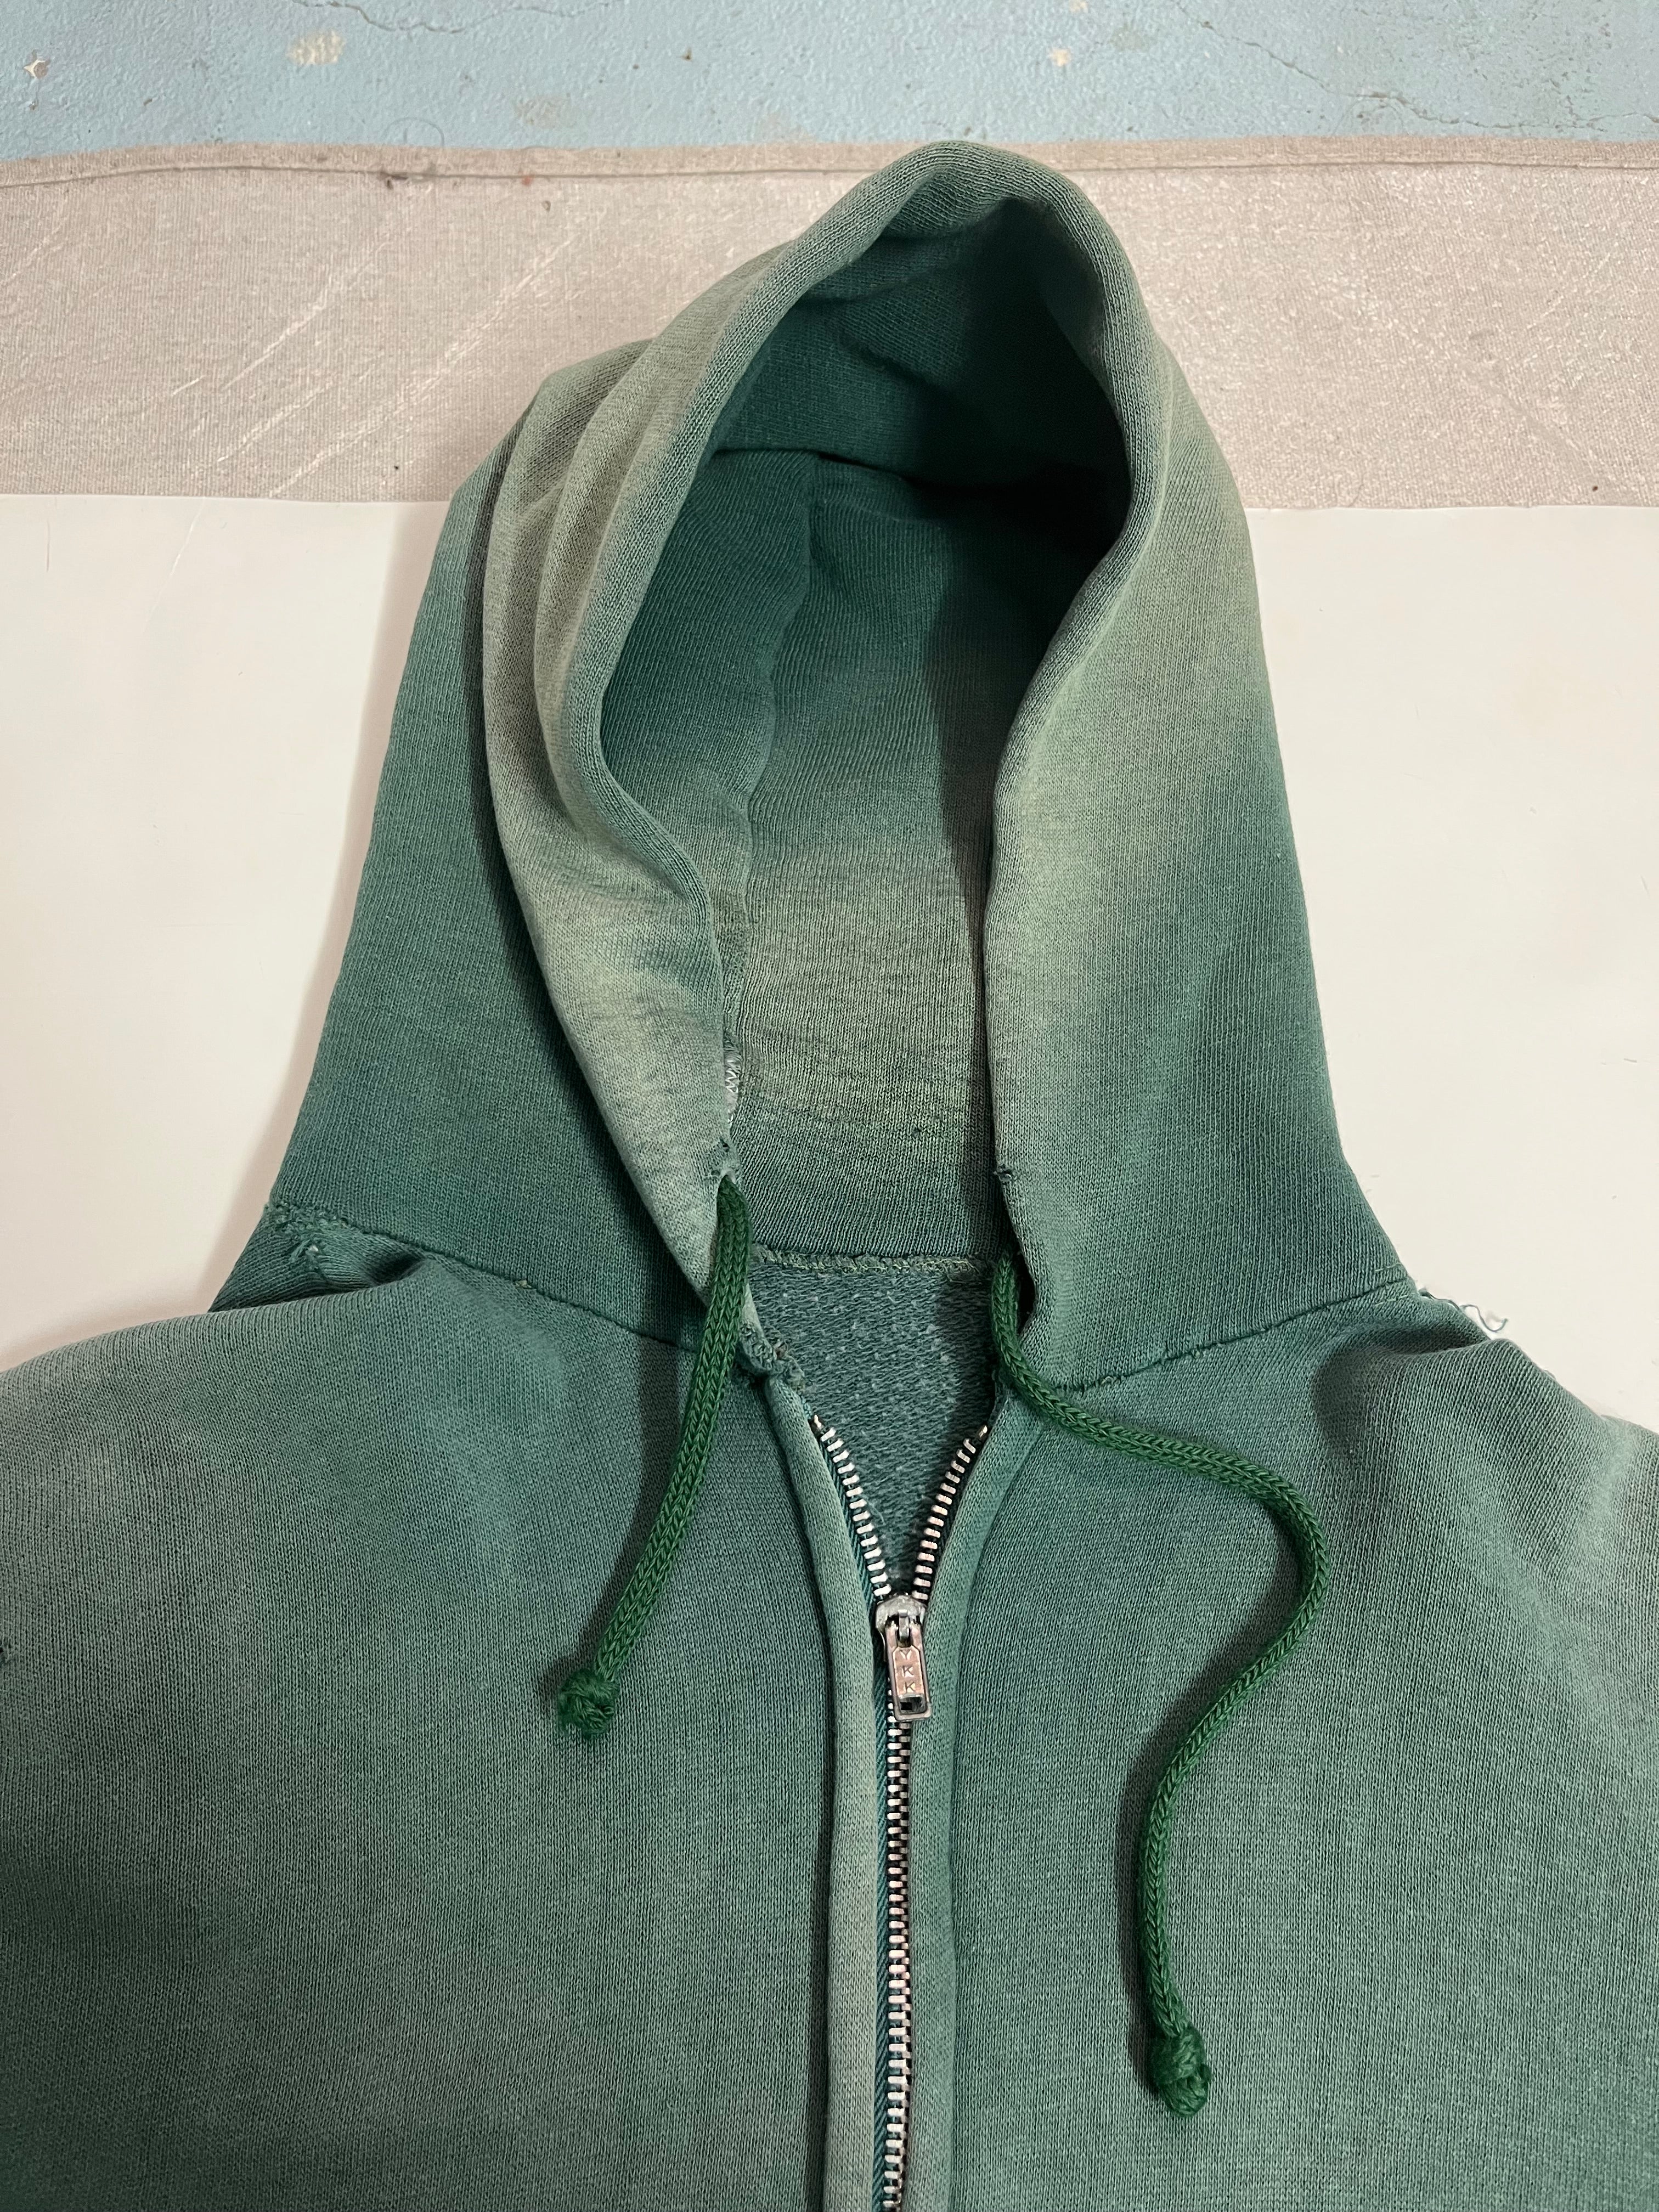 Sun Faded Early ‘70s Zip Hoodie With Repairs - Faded Green - S/M